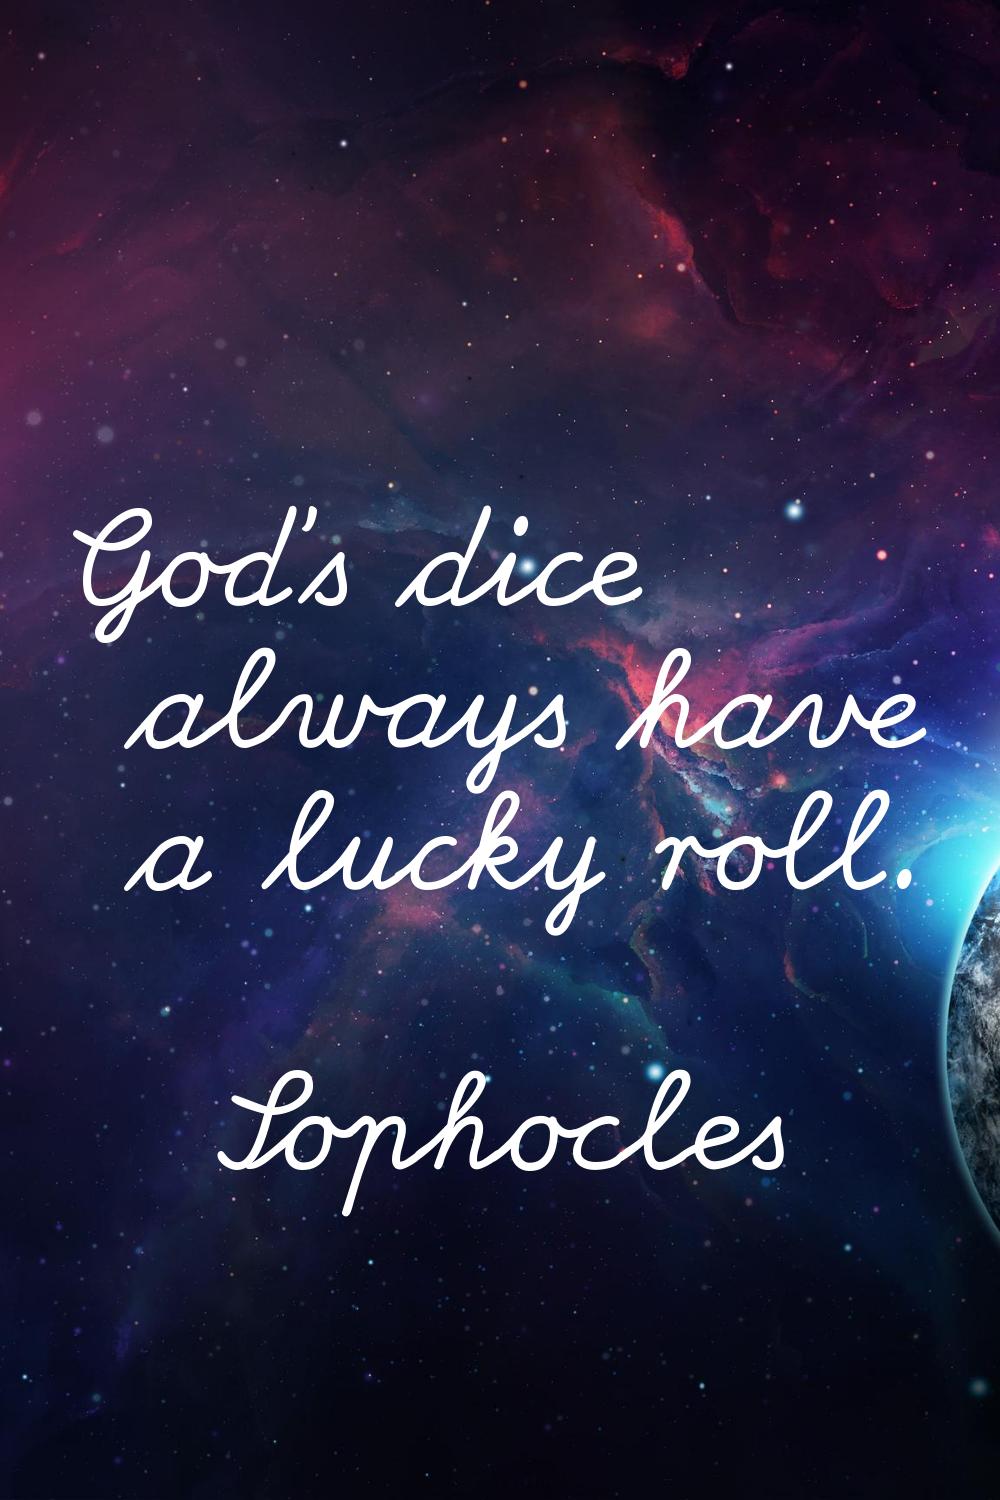 God's dice always have a lucky roll.